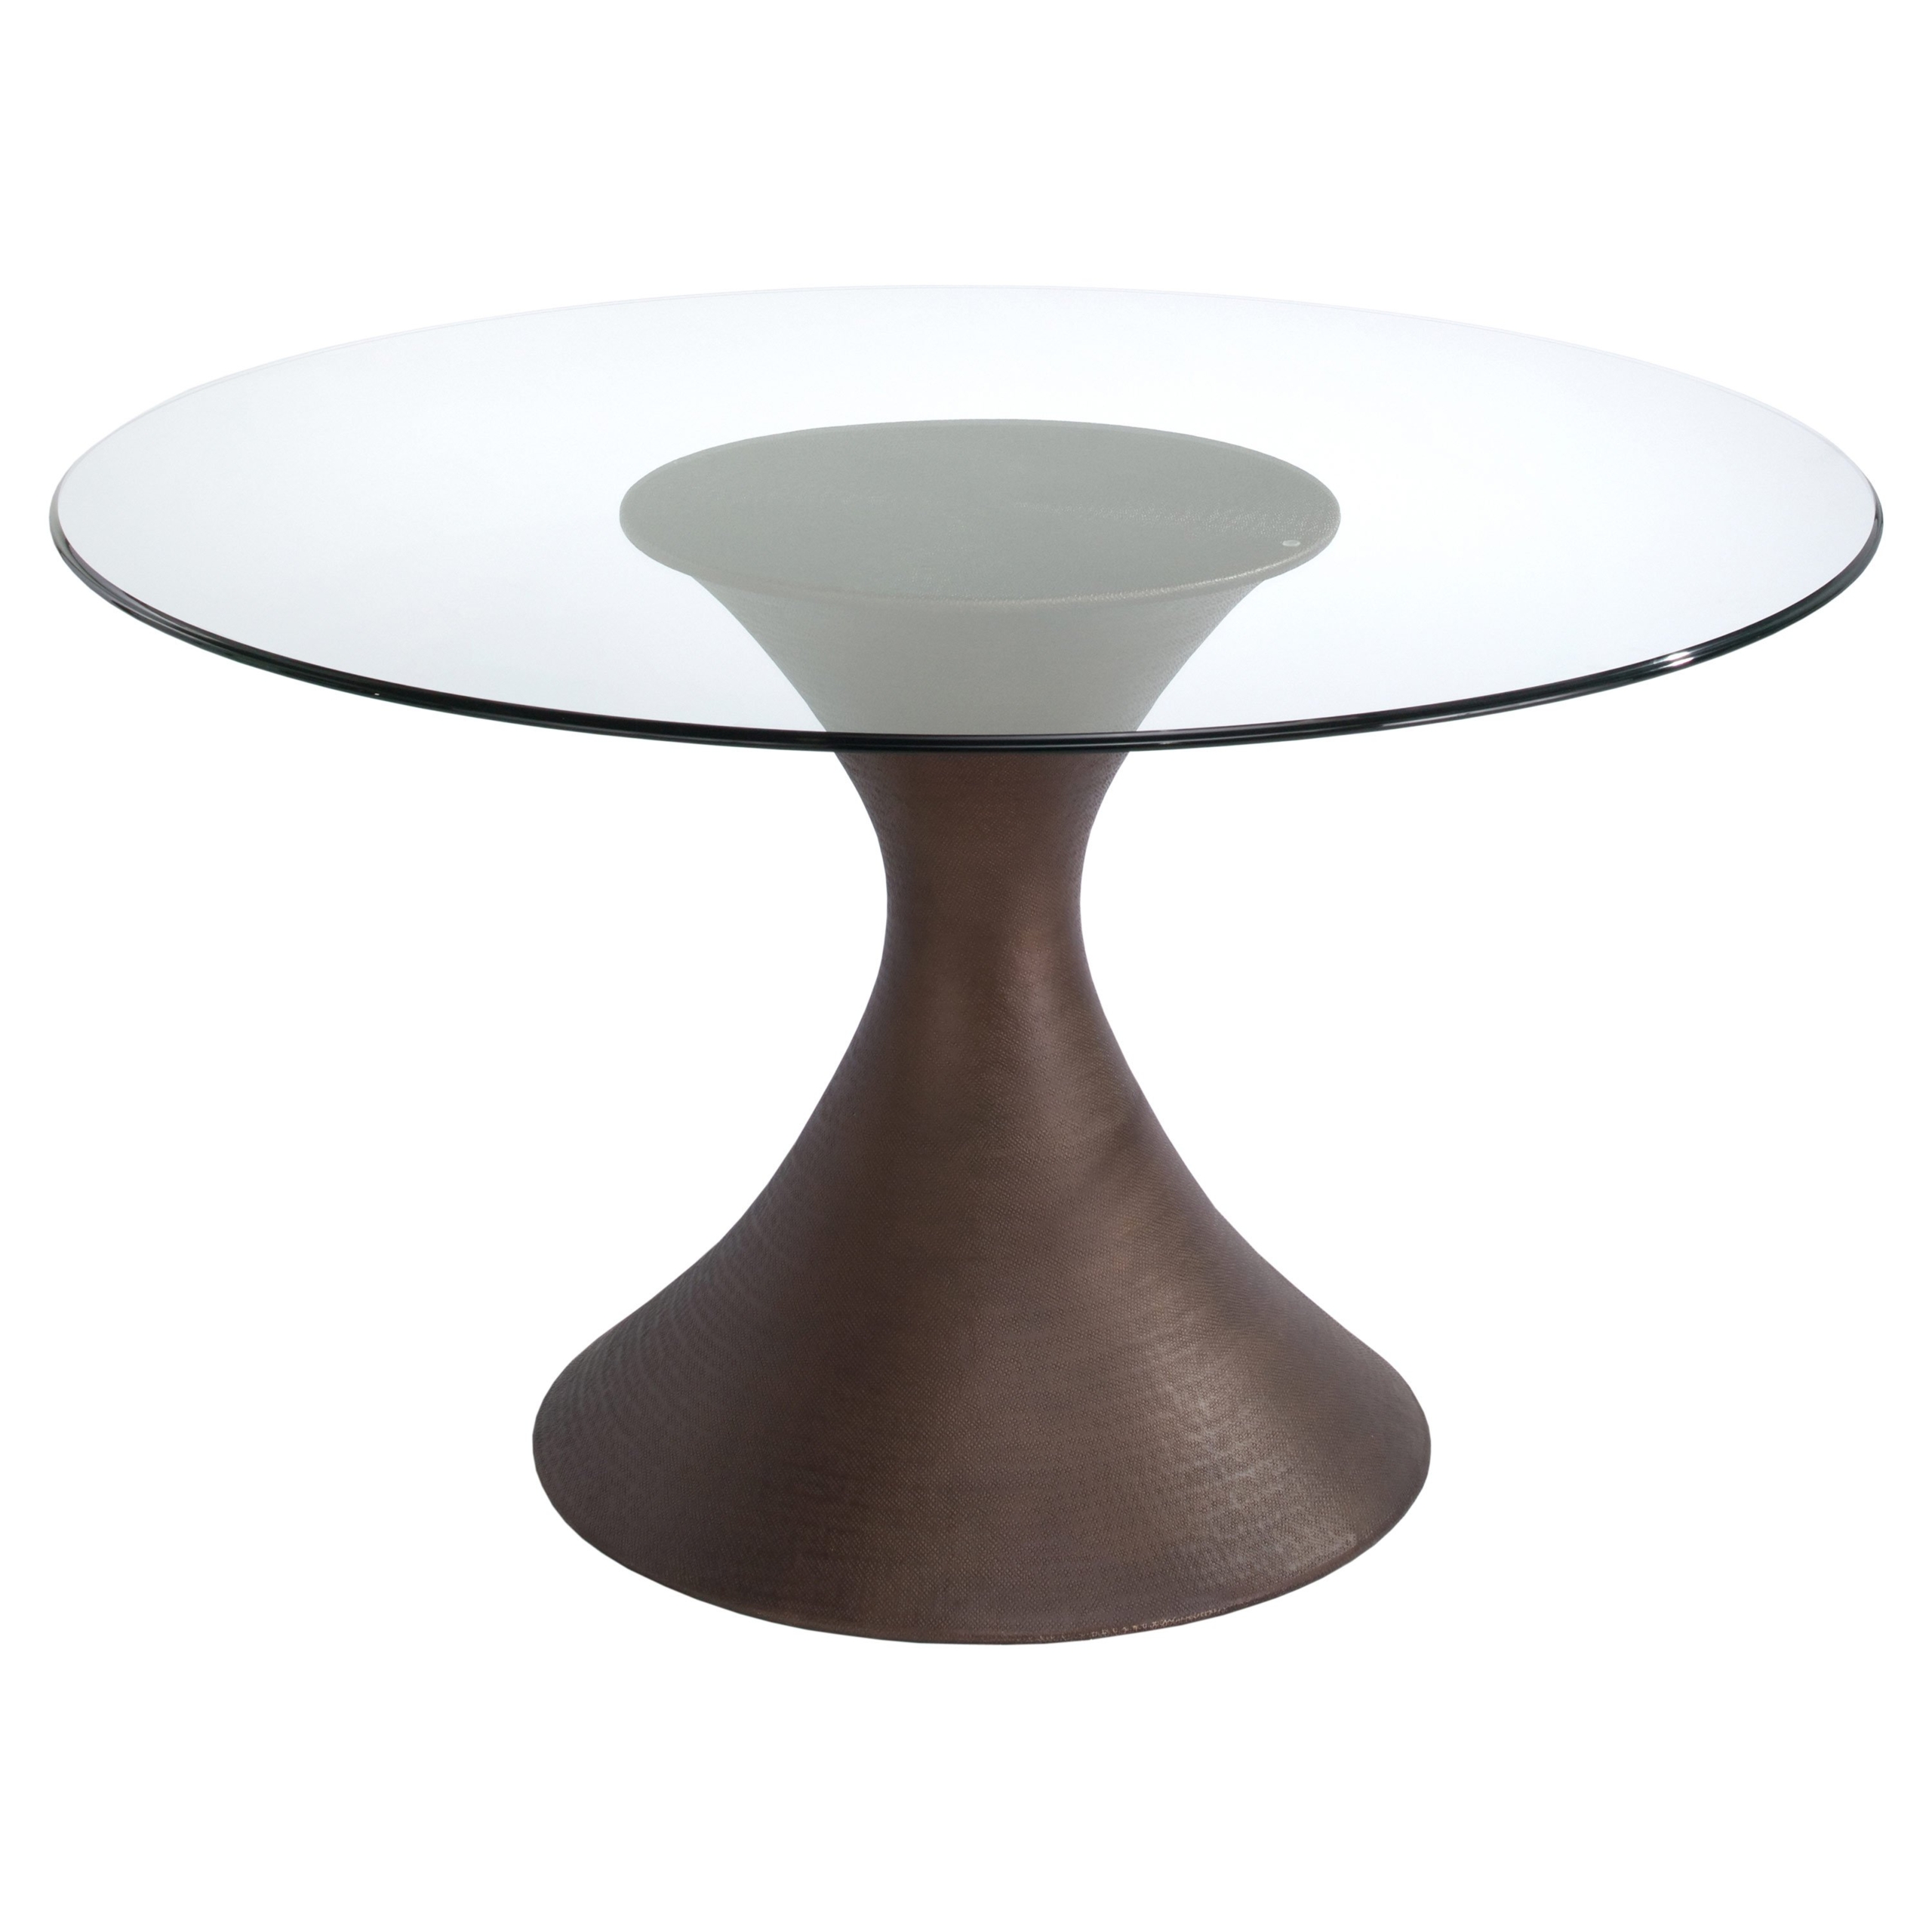 Round glass dining table wood base